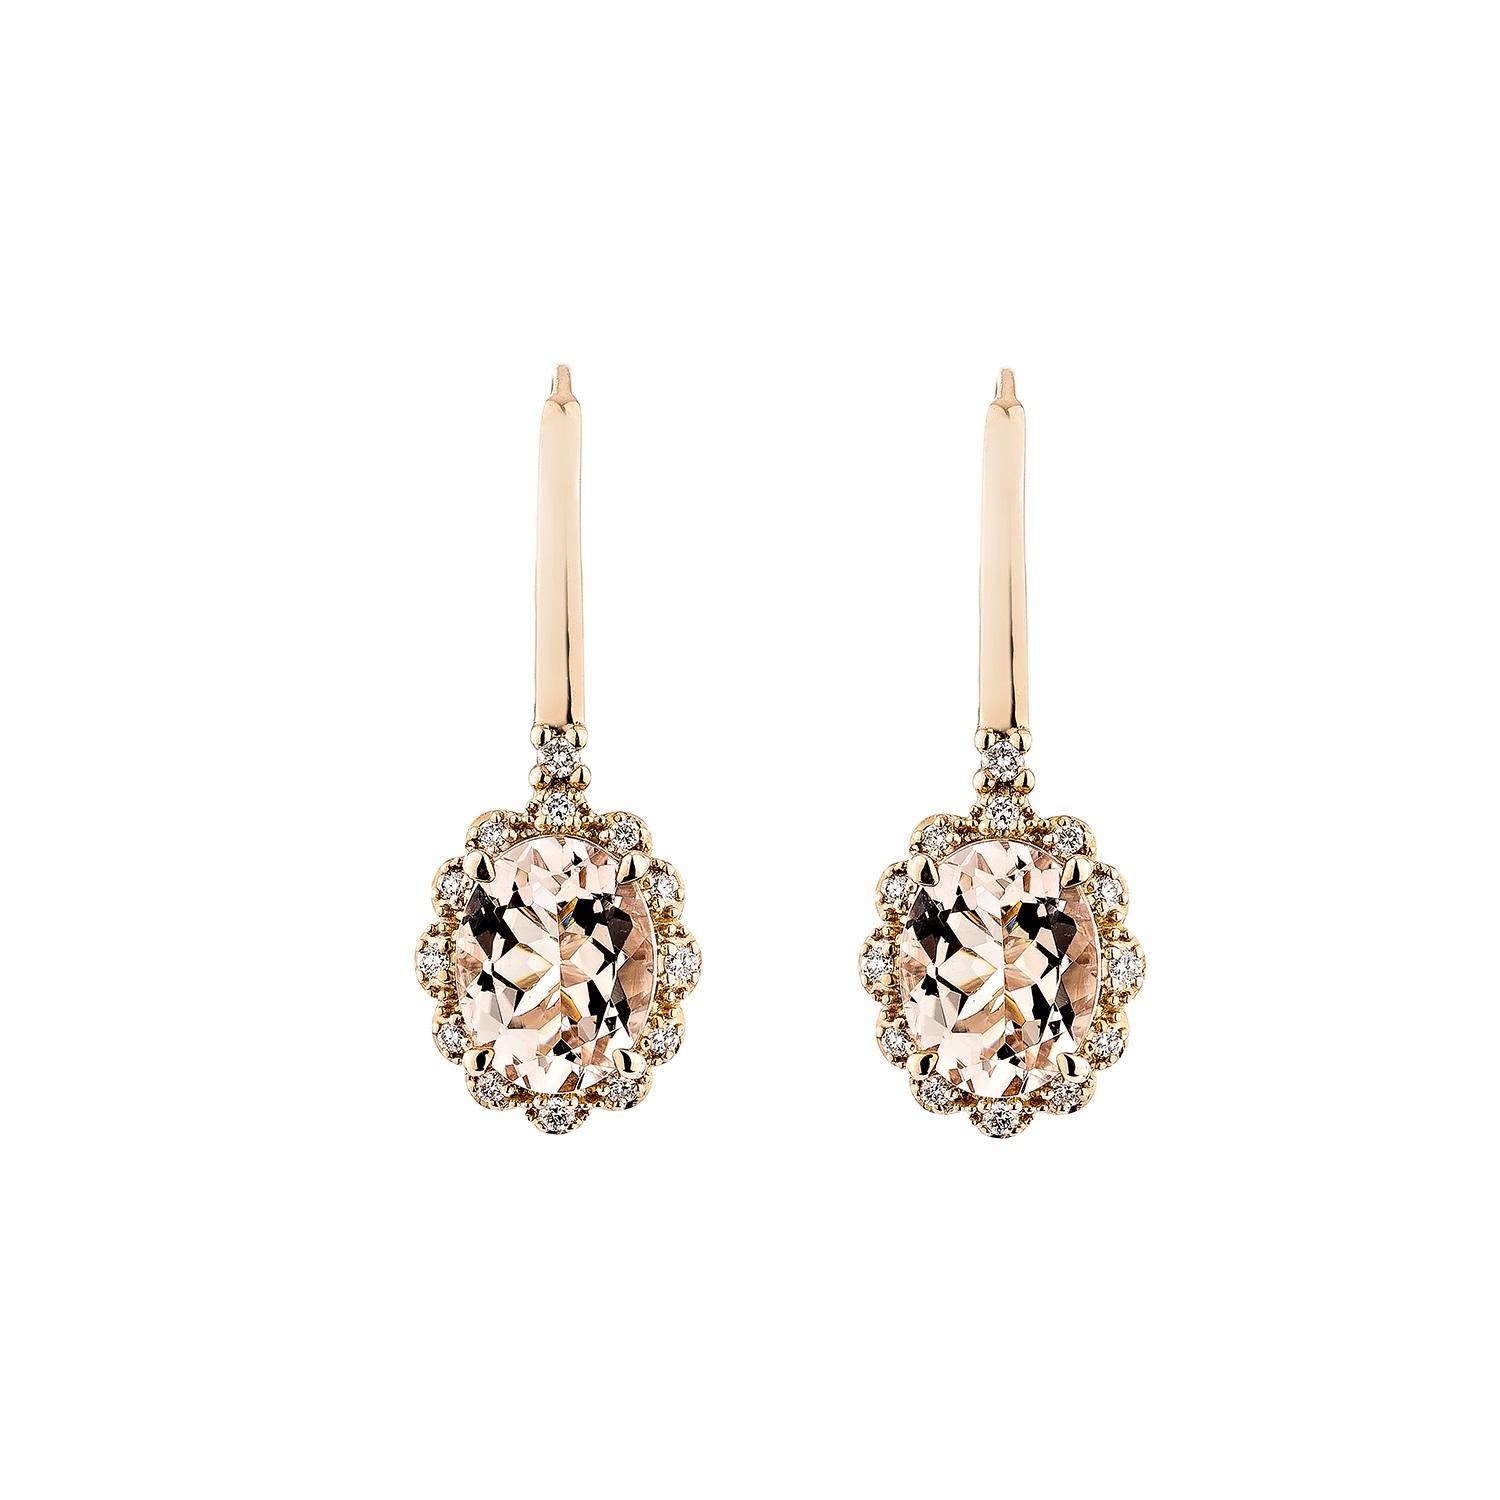 Contemporary 2.92 Carat Morganite Drop Earring in 18Karat Rose Gold with White Diamond. For Sale